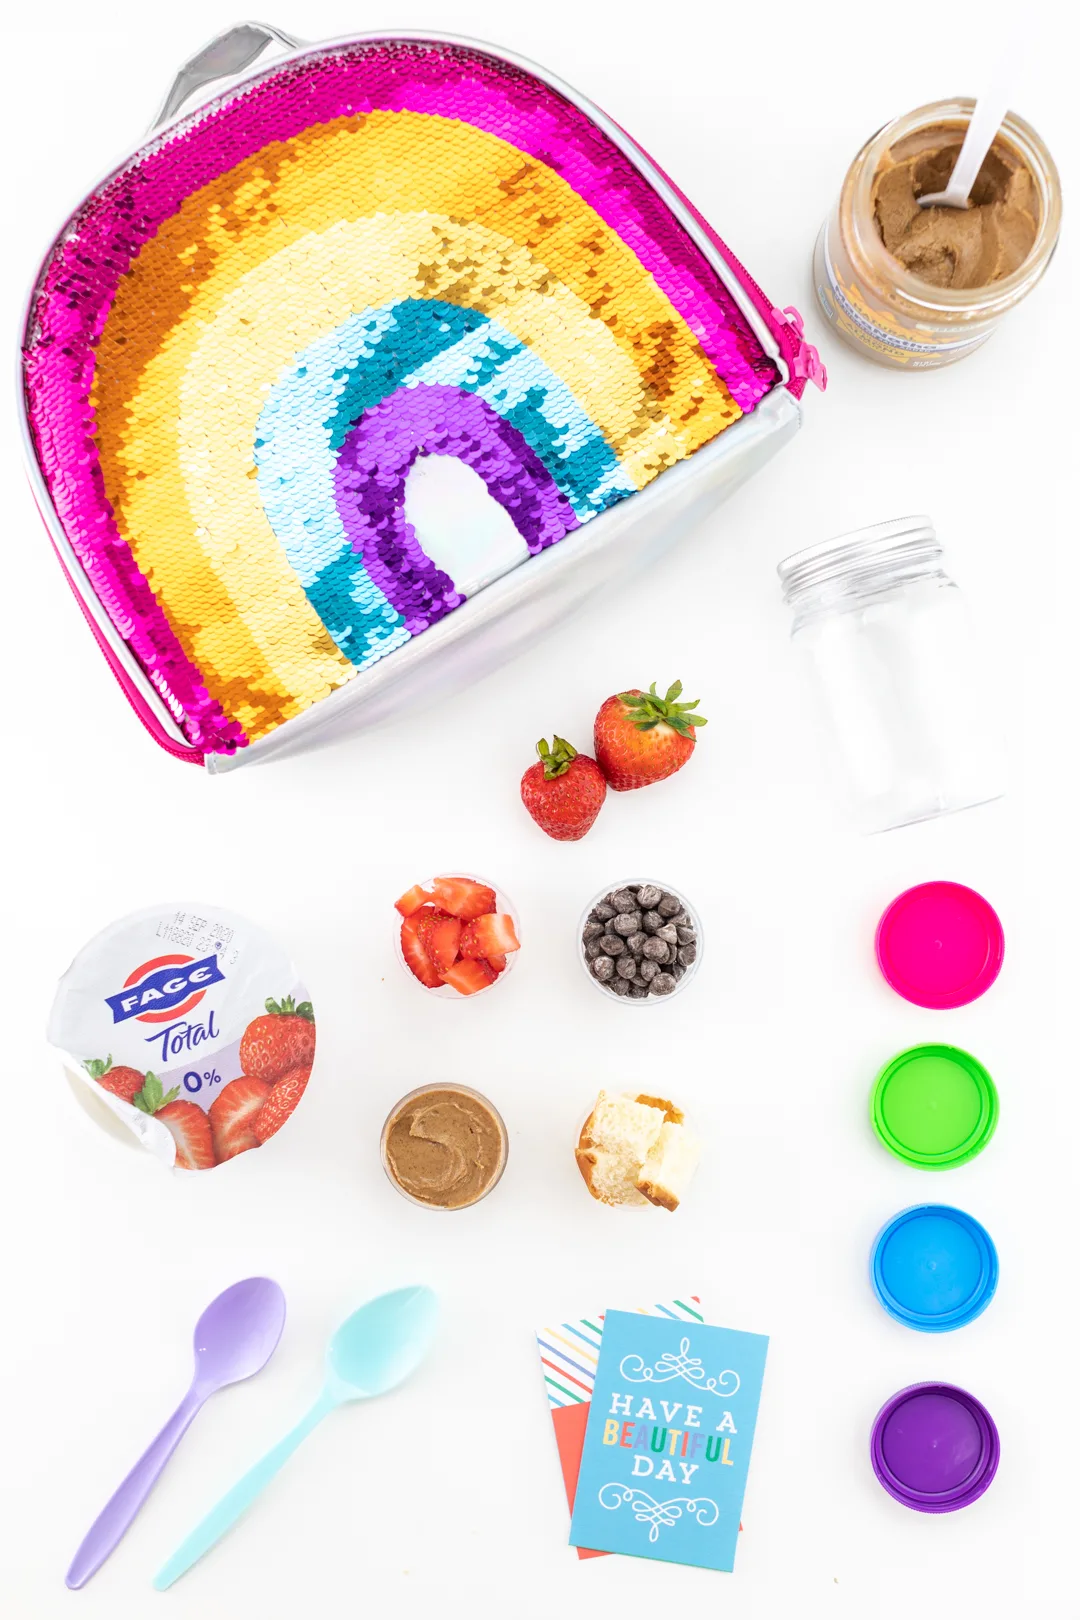 diy yogurt parfait kit for kids with toppings put into little separate containers